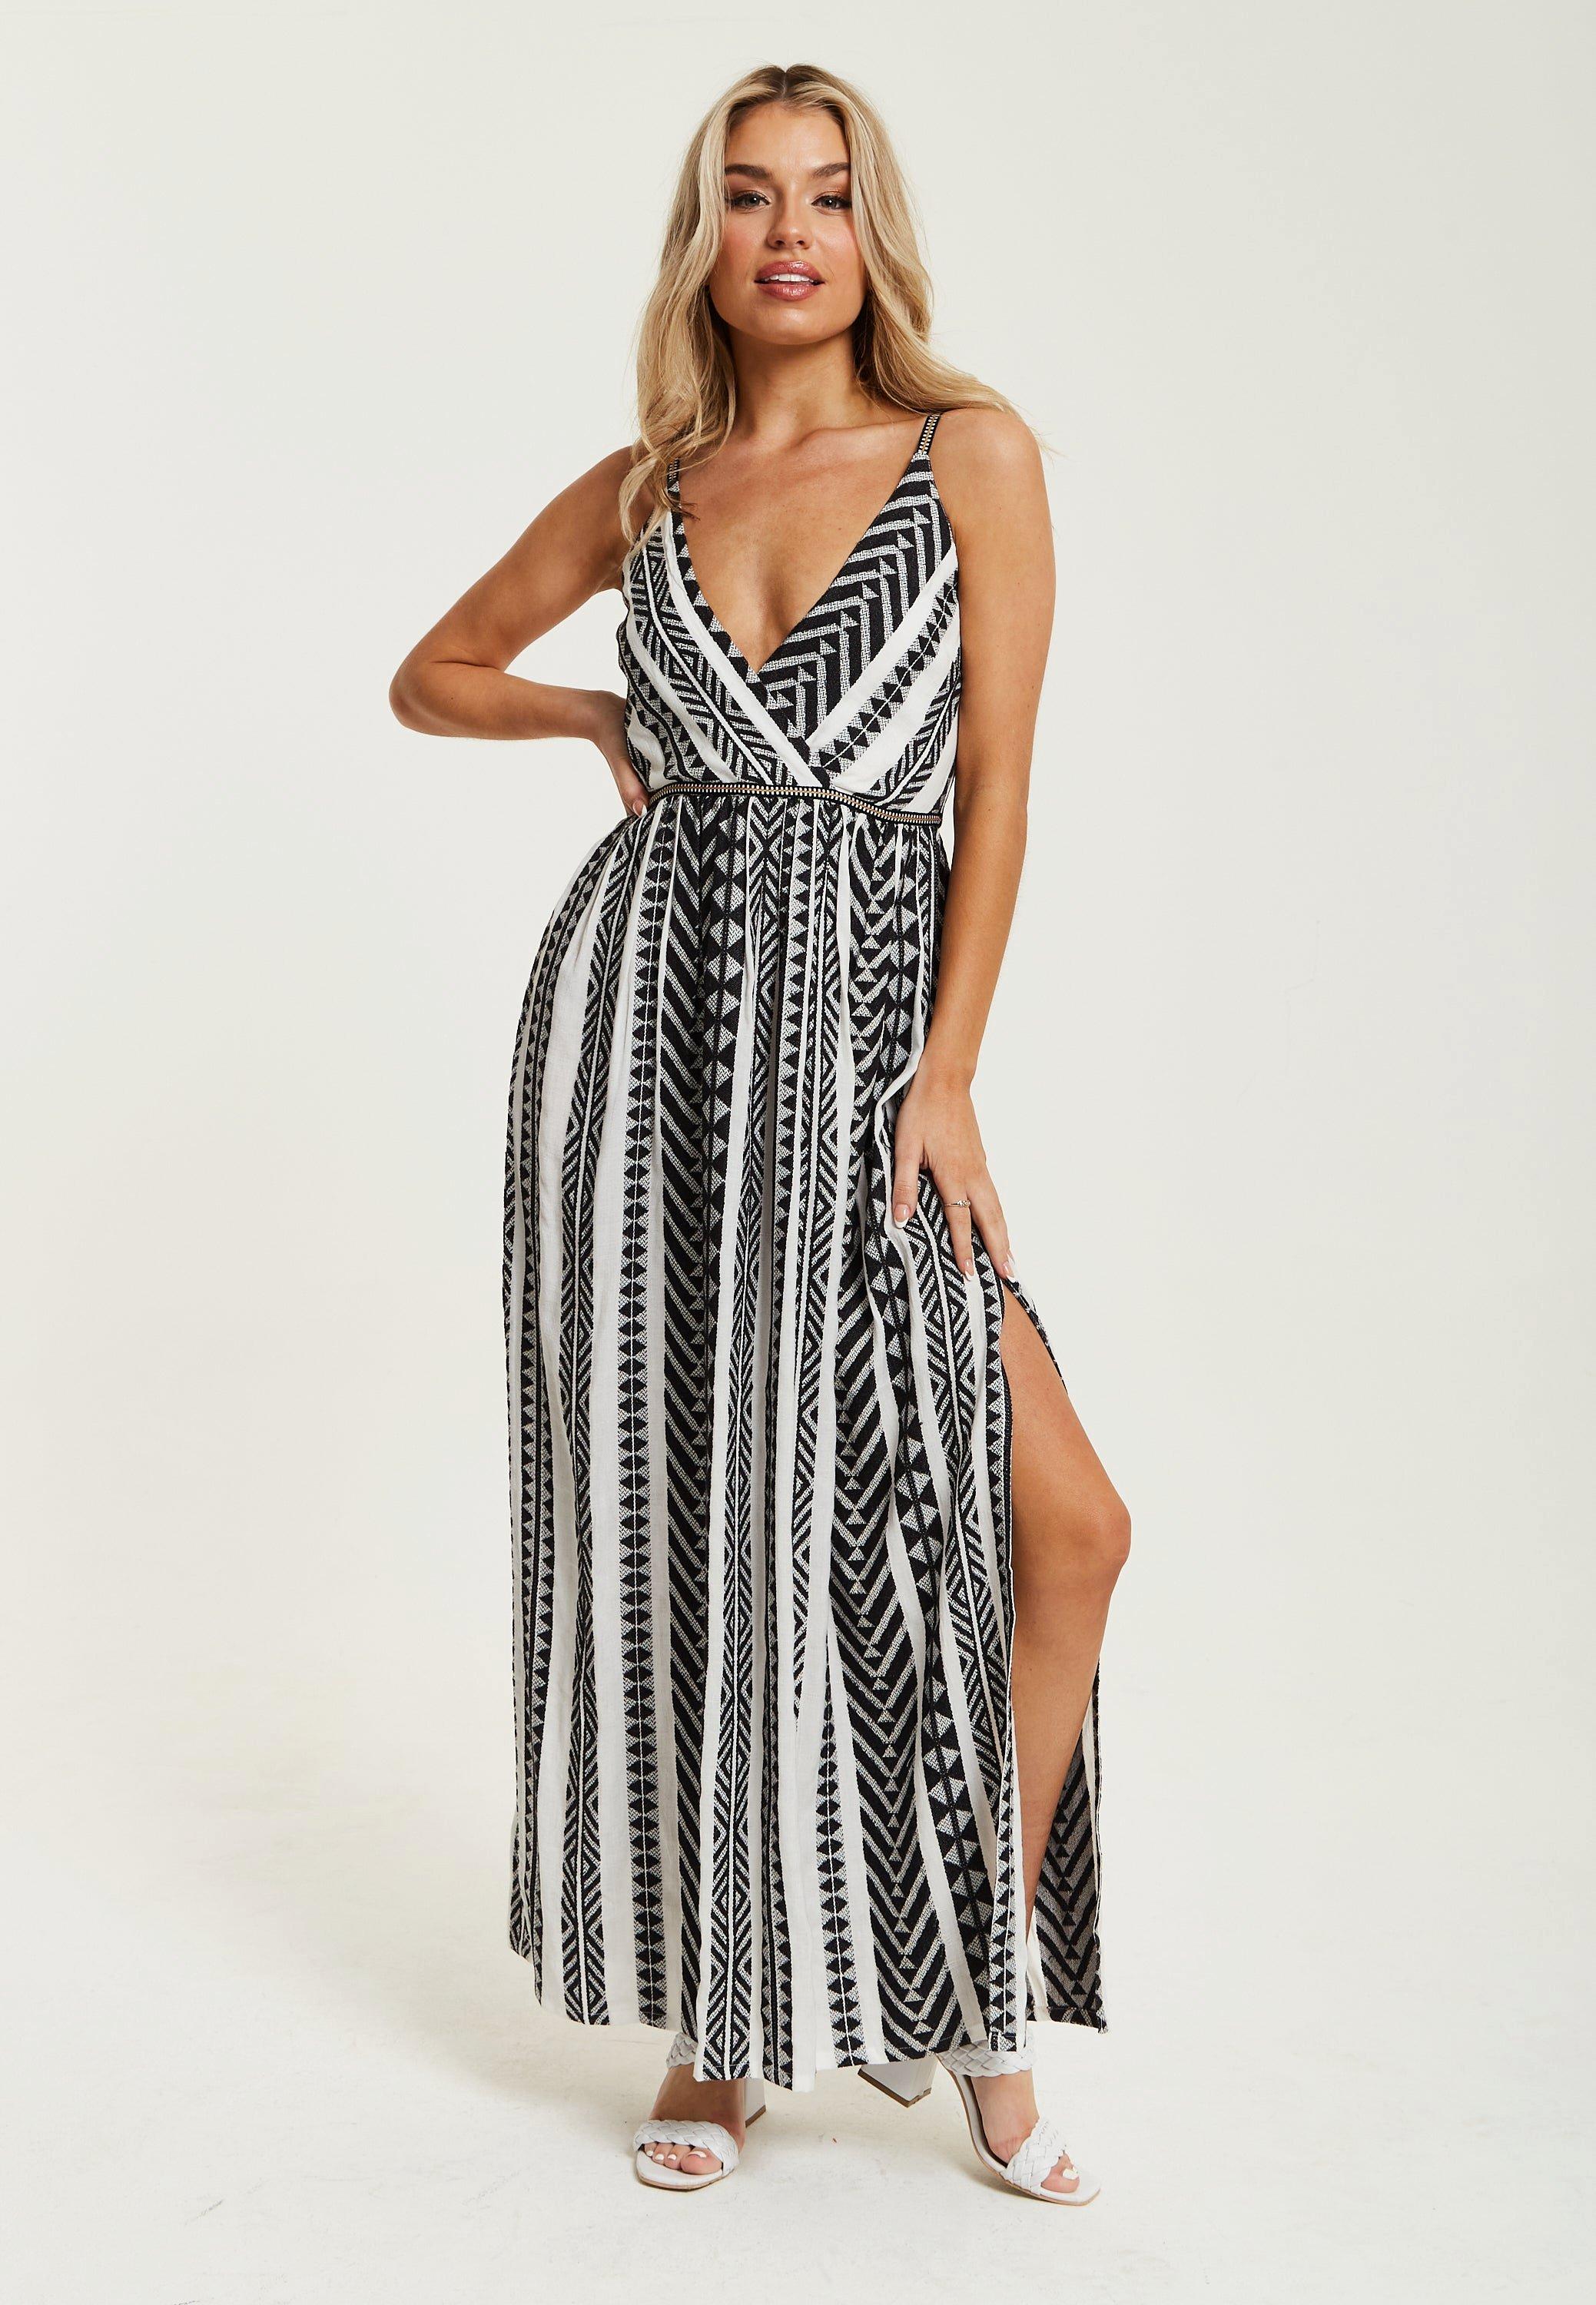 Aztec Jacquard Maxi Dress In White And Black